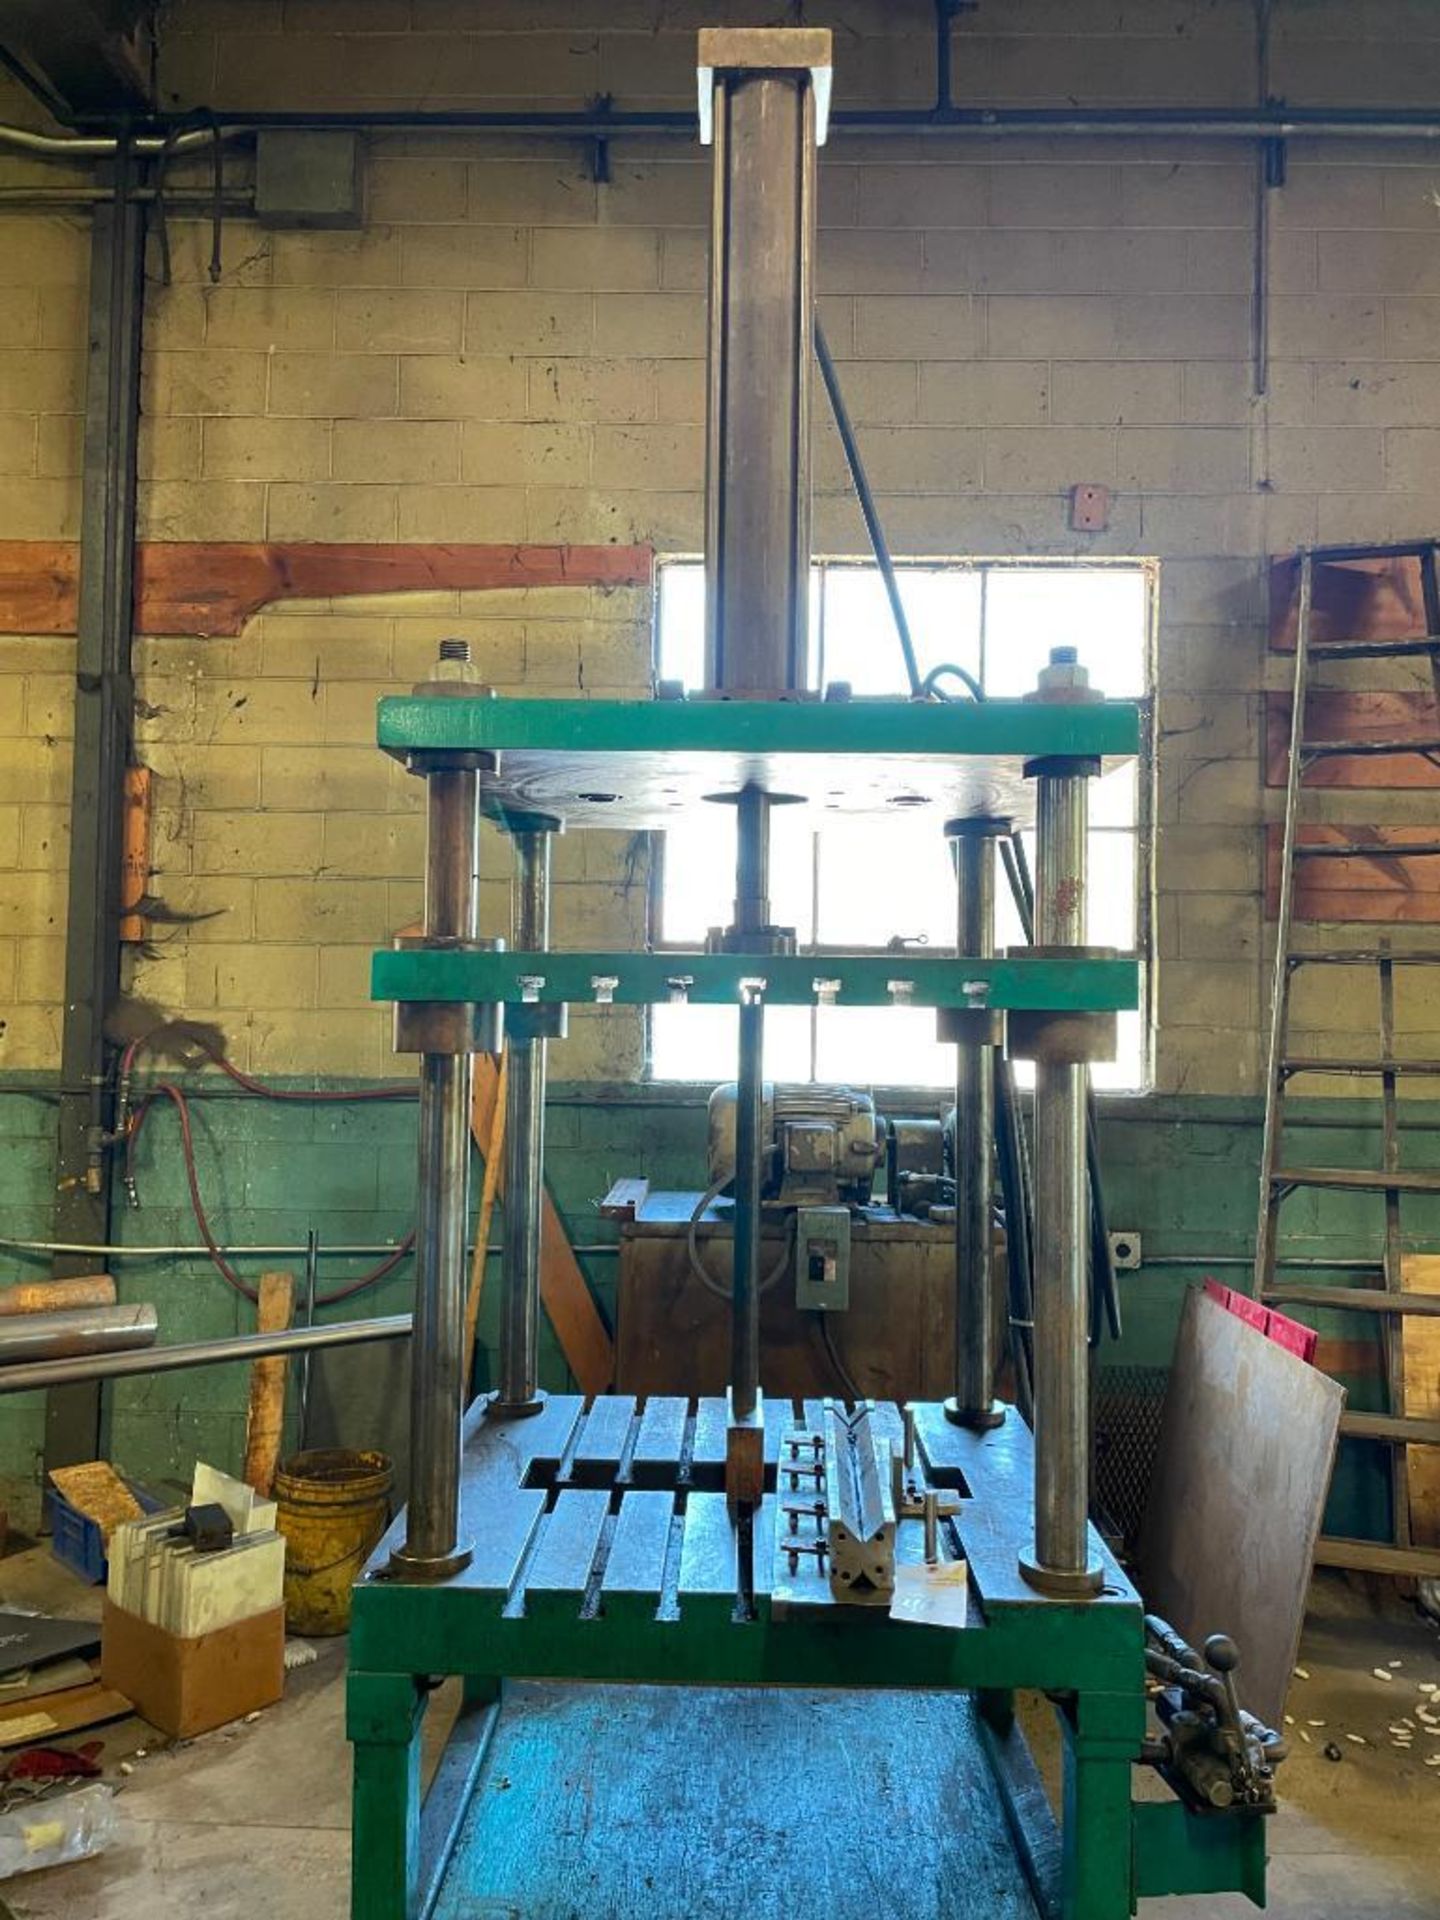 4 POST HYDRAULIC PRESS AND ACCESSORIES; $750 LOADING FEE - Image 4 of 7